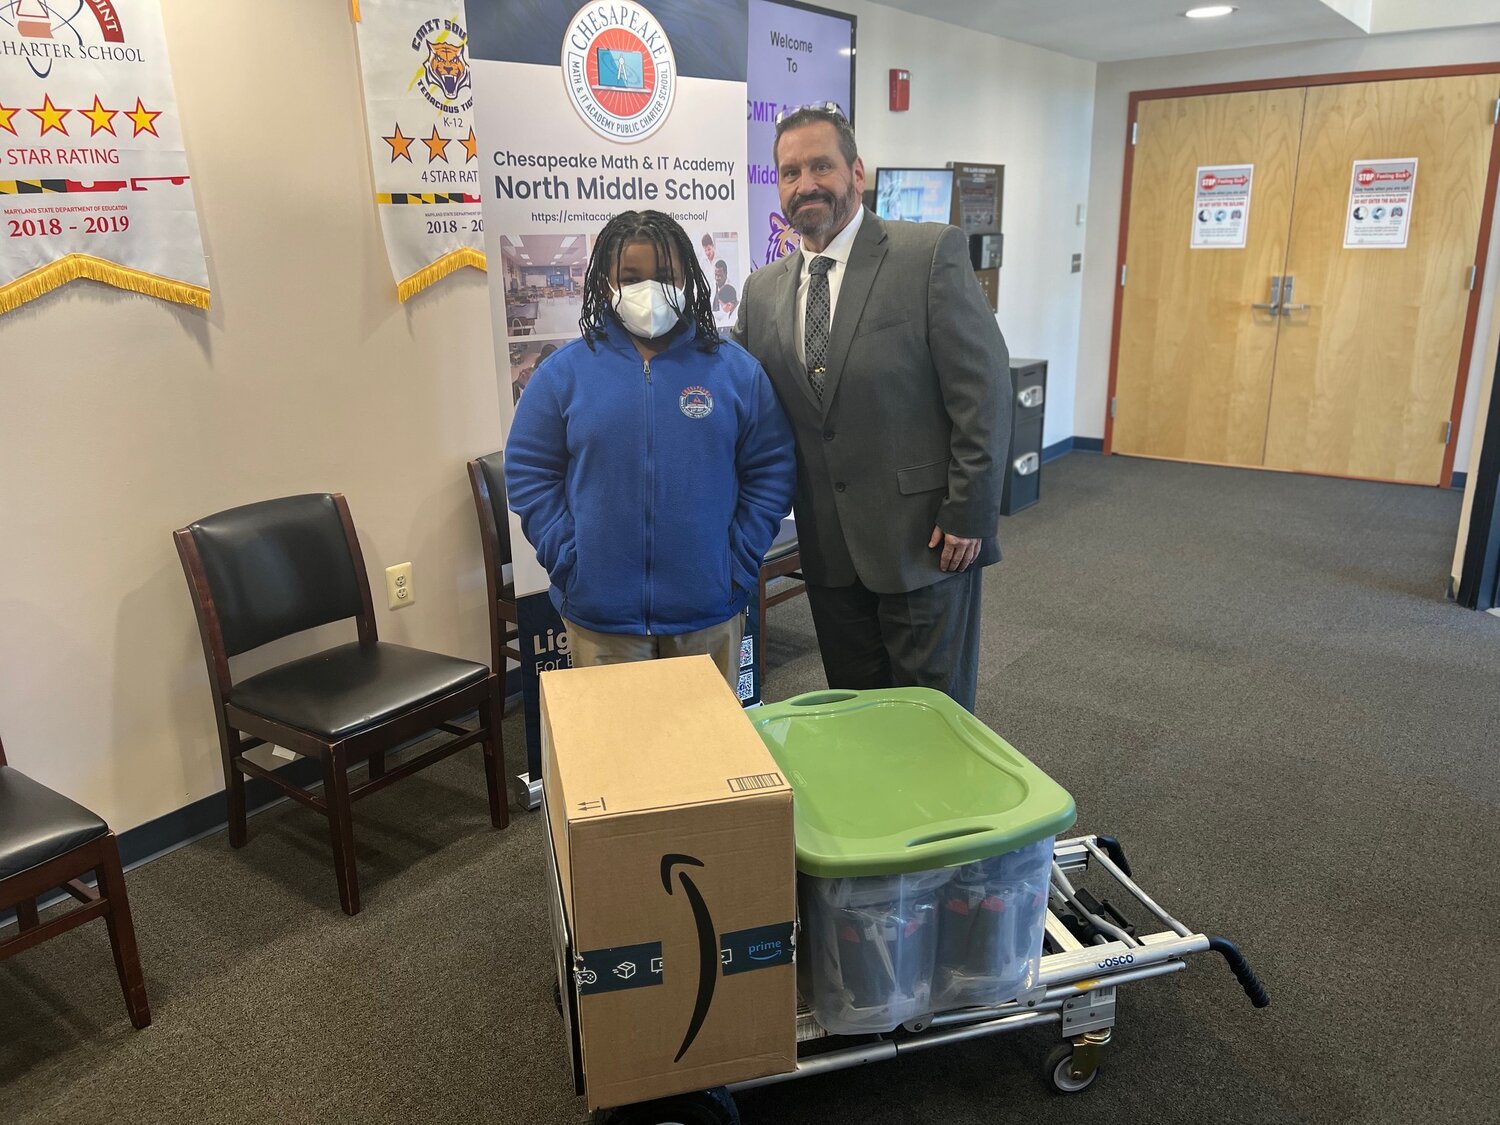 Troy Brooks, a student, stood with James Screven, assistant principal at Chesapeake Math and IT Academy Middle School. Troy has raised more than $1,100 in medical supplies for Screven’s upcoming Ukraine mission trip.